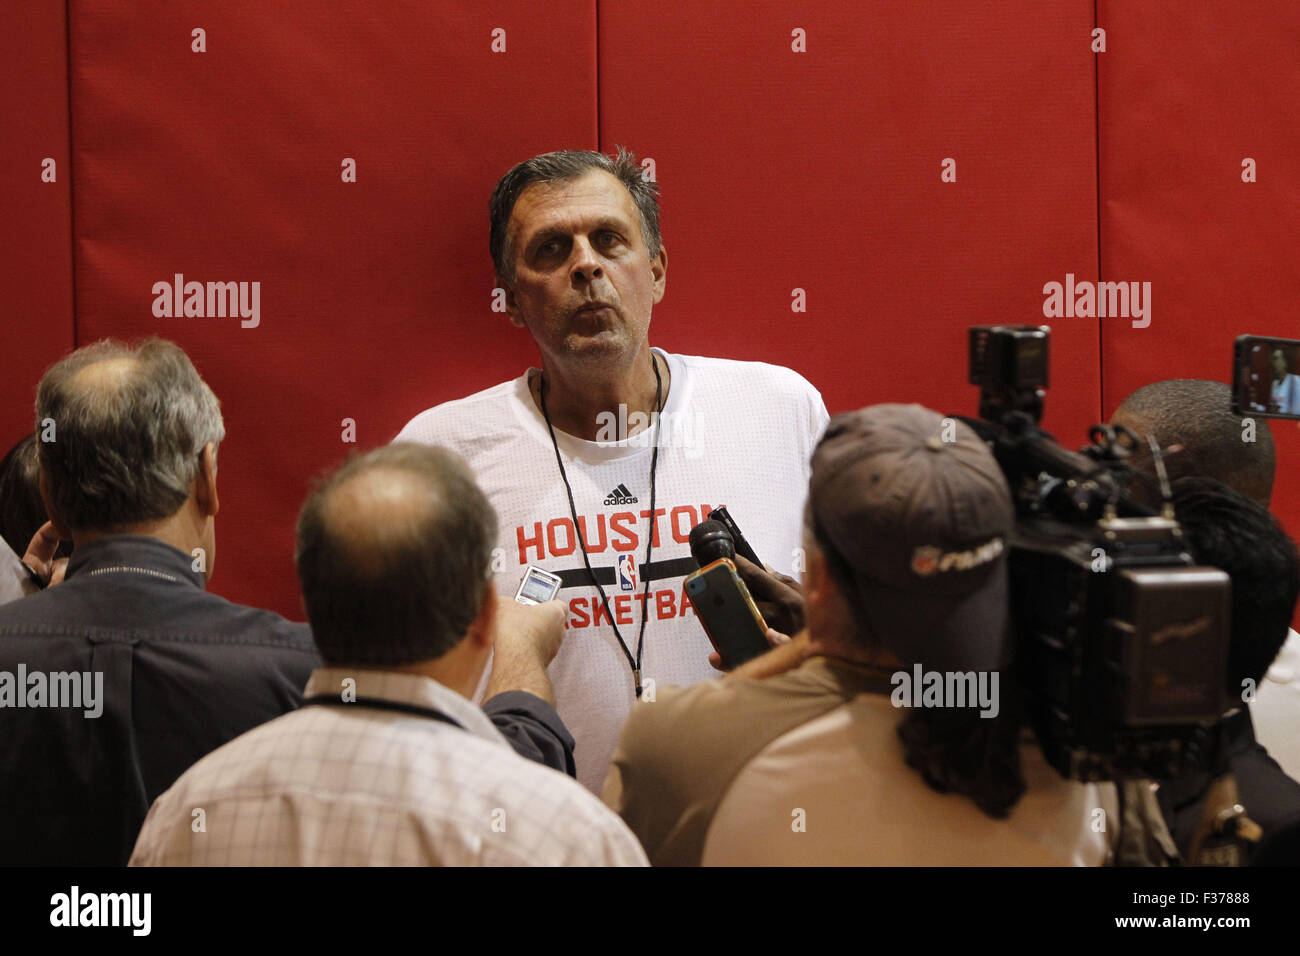 Houston, USA. 30th September, 2015. Houston Rockets head coach Kevin McHale talks to media after a training in Houston, the United States, Oct. 1, 2015. Credit:  Song Qiong/Xinhua/Alamy Live News Stock Photo